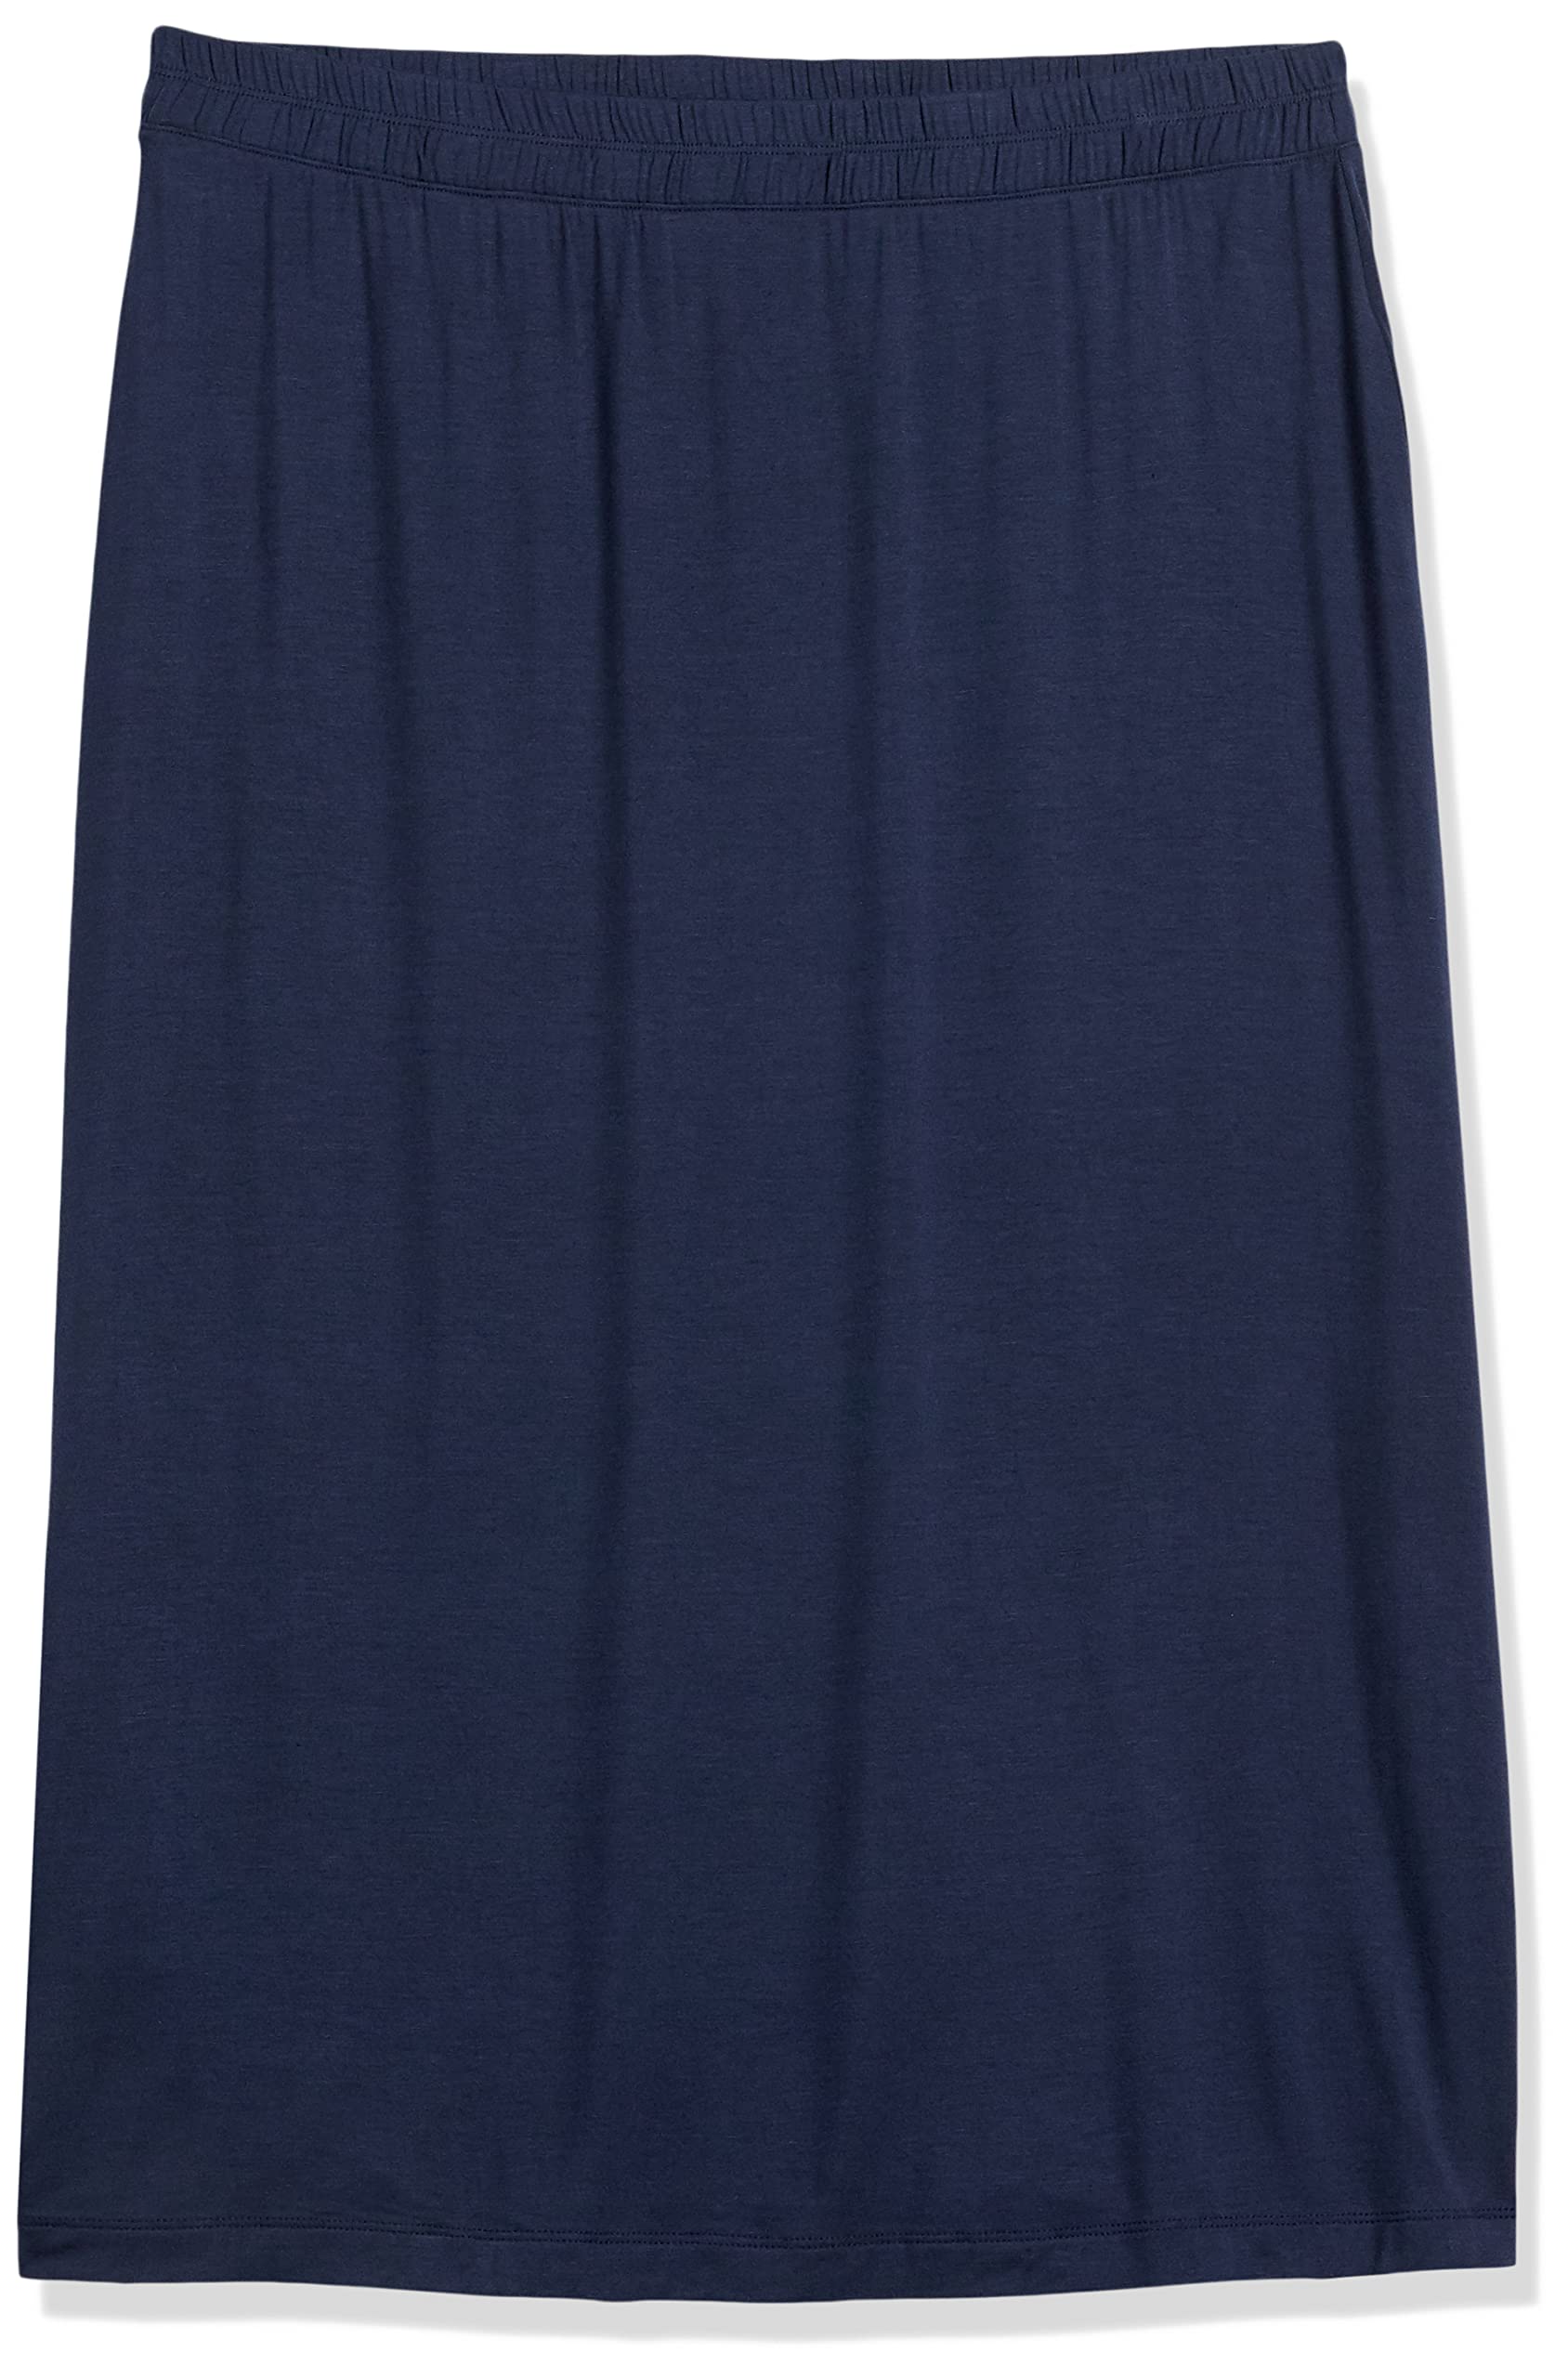 Amazon Essentials Women's Pull-On Knit Midi Skirt (Available in Plus Size)